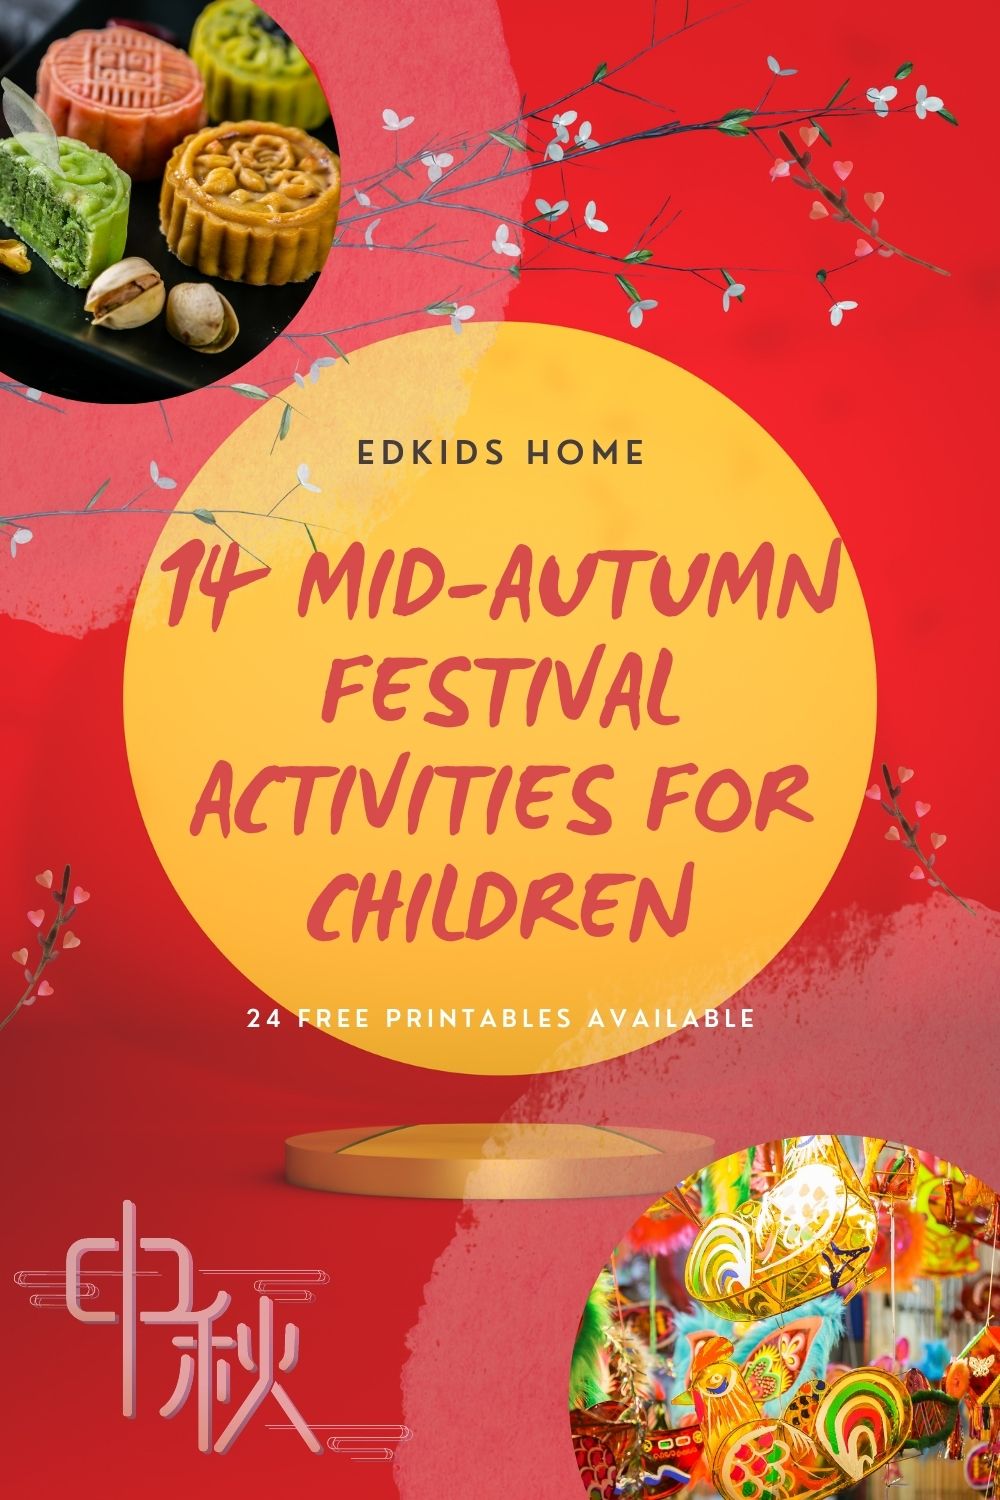 14 Mid-Autumn Festival activities for children - 24 free worksheets available